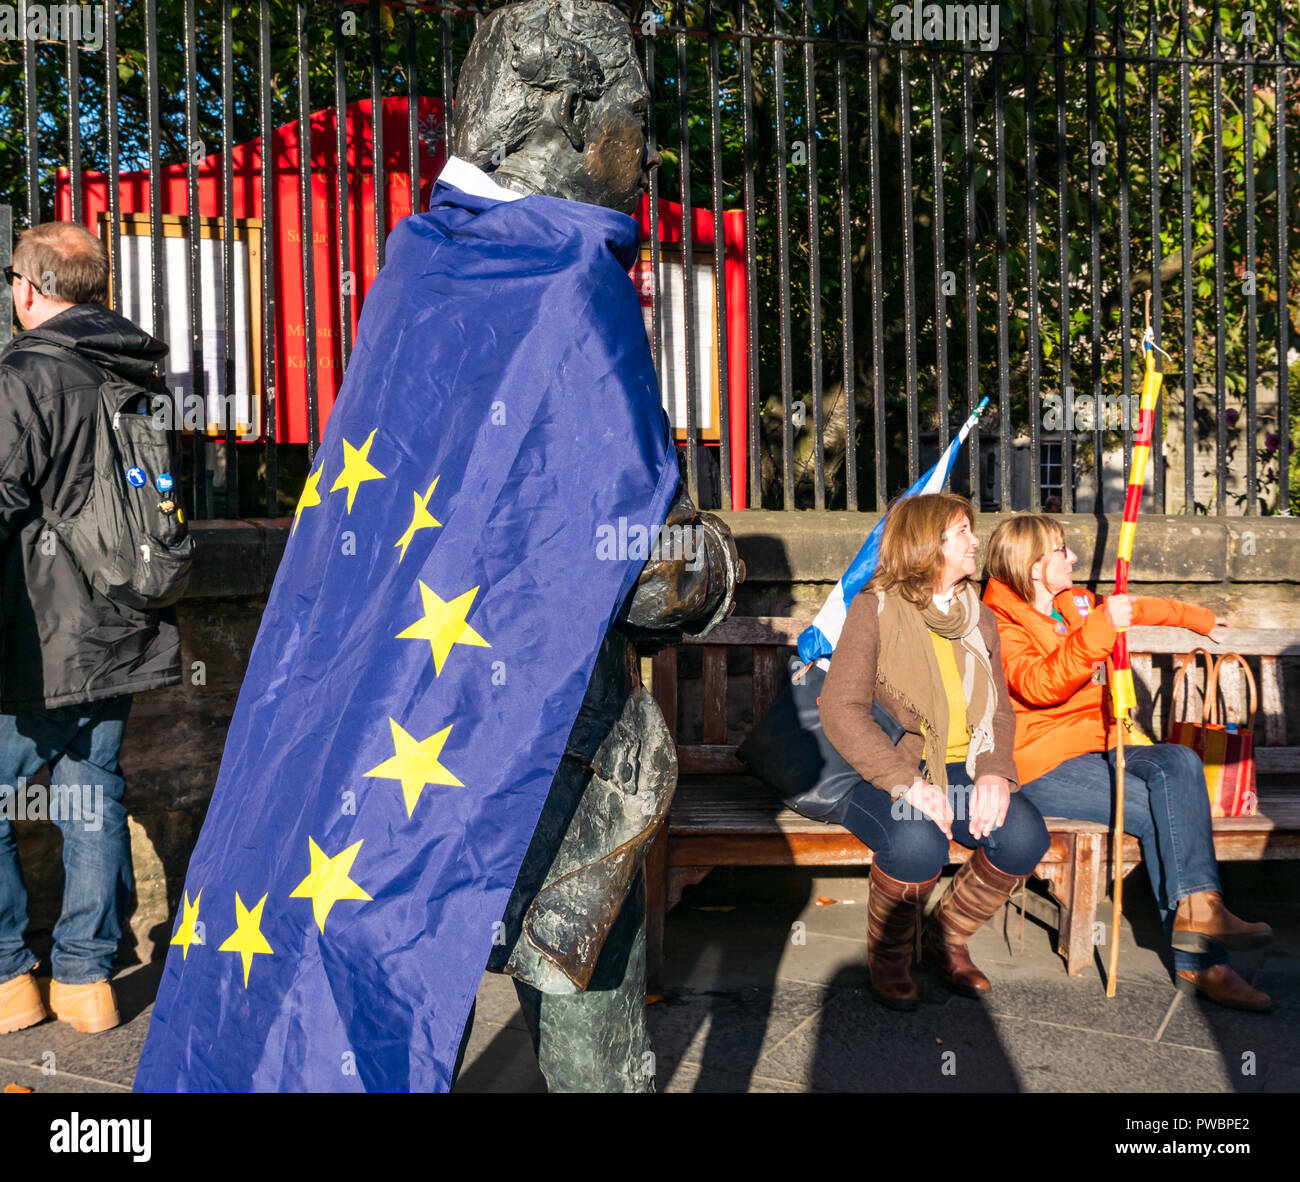 Poet Robert Fergusson statue draped in EU stars flag with women sitting on bench after AUOB march, Canongate, Royal Mile, Edinburgh, Scotland, UK Stock Photo